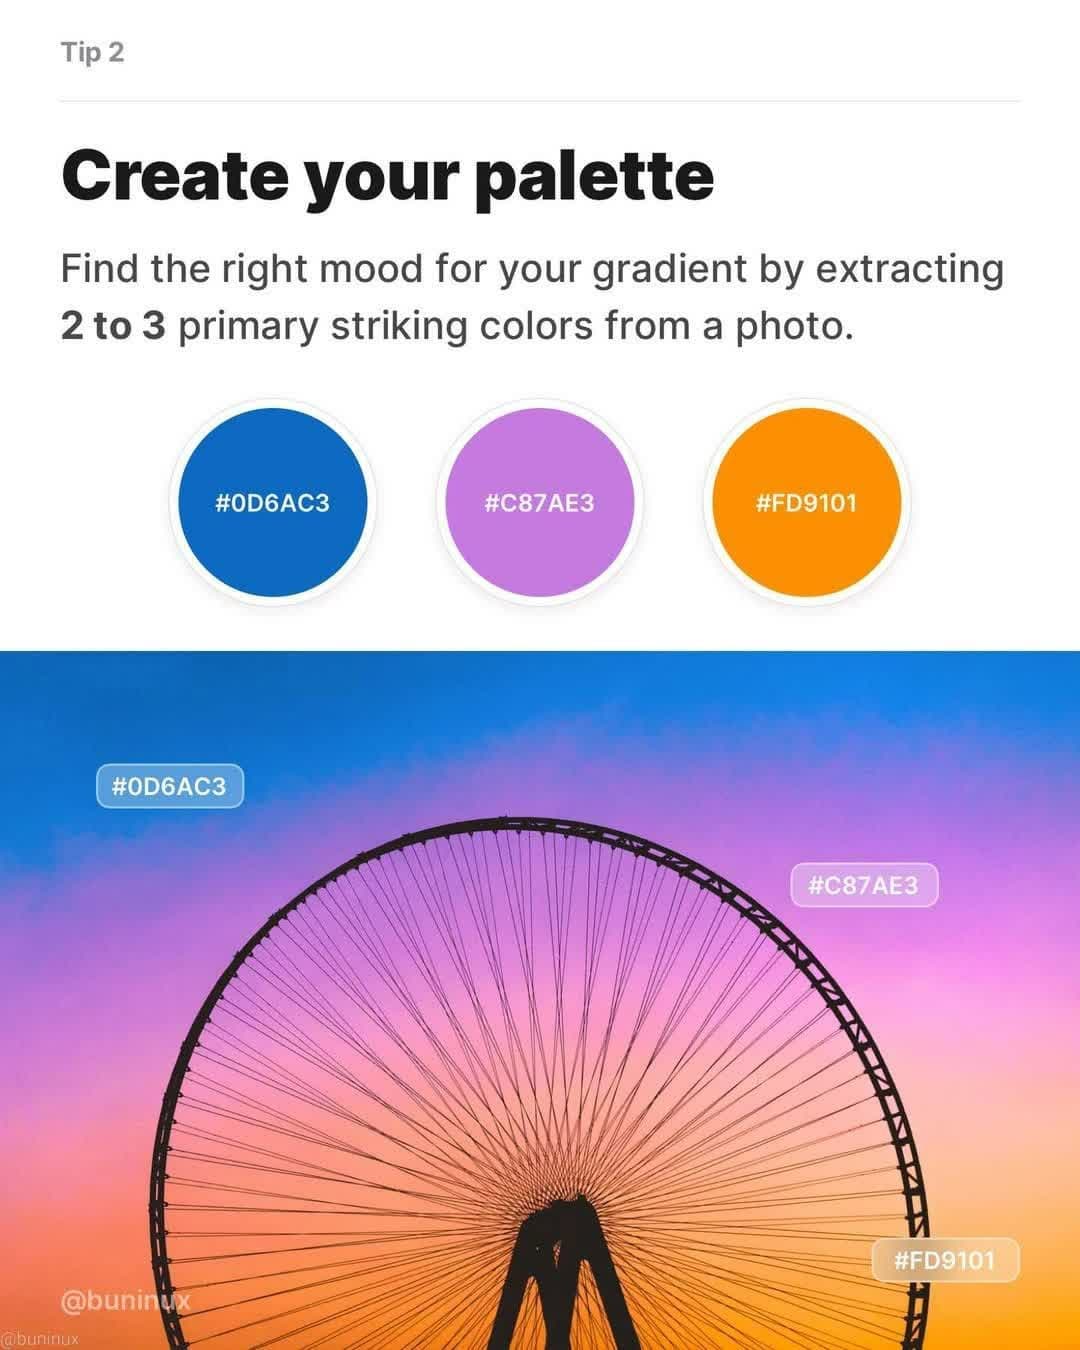 Tip 2 - Create your palette